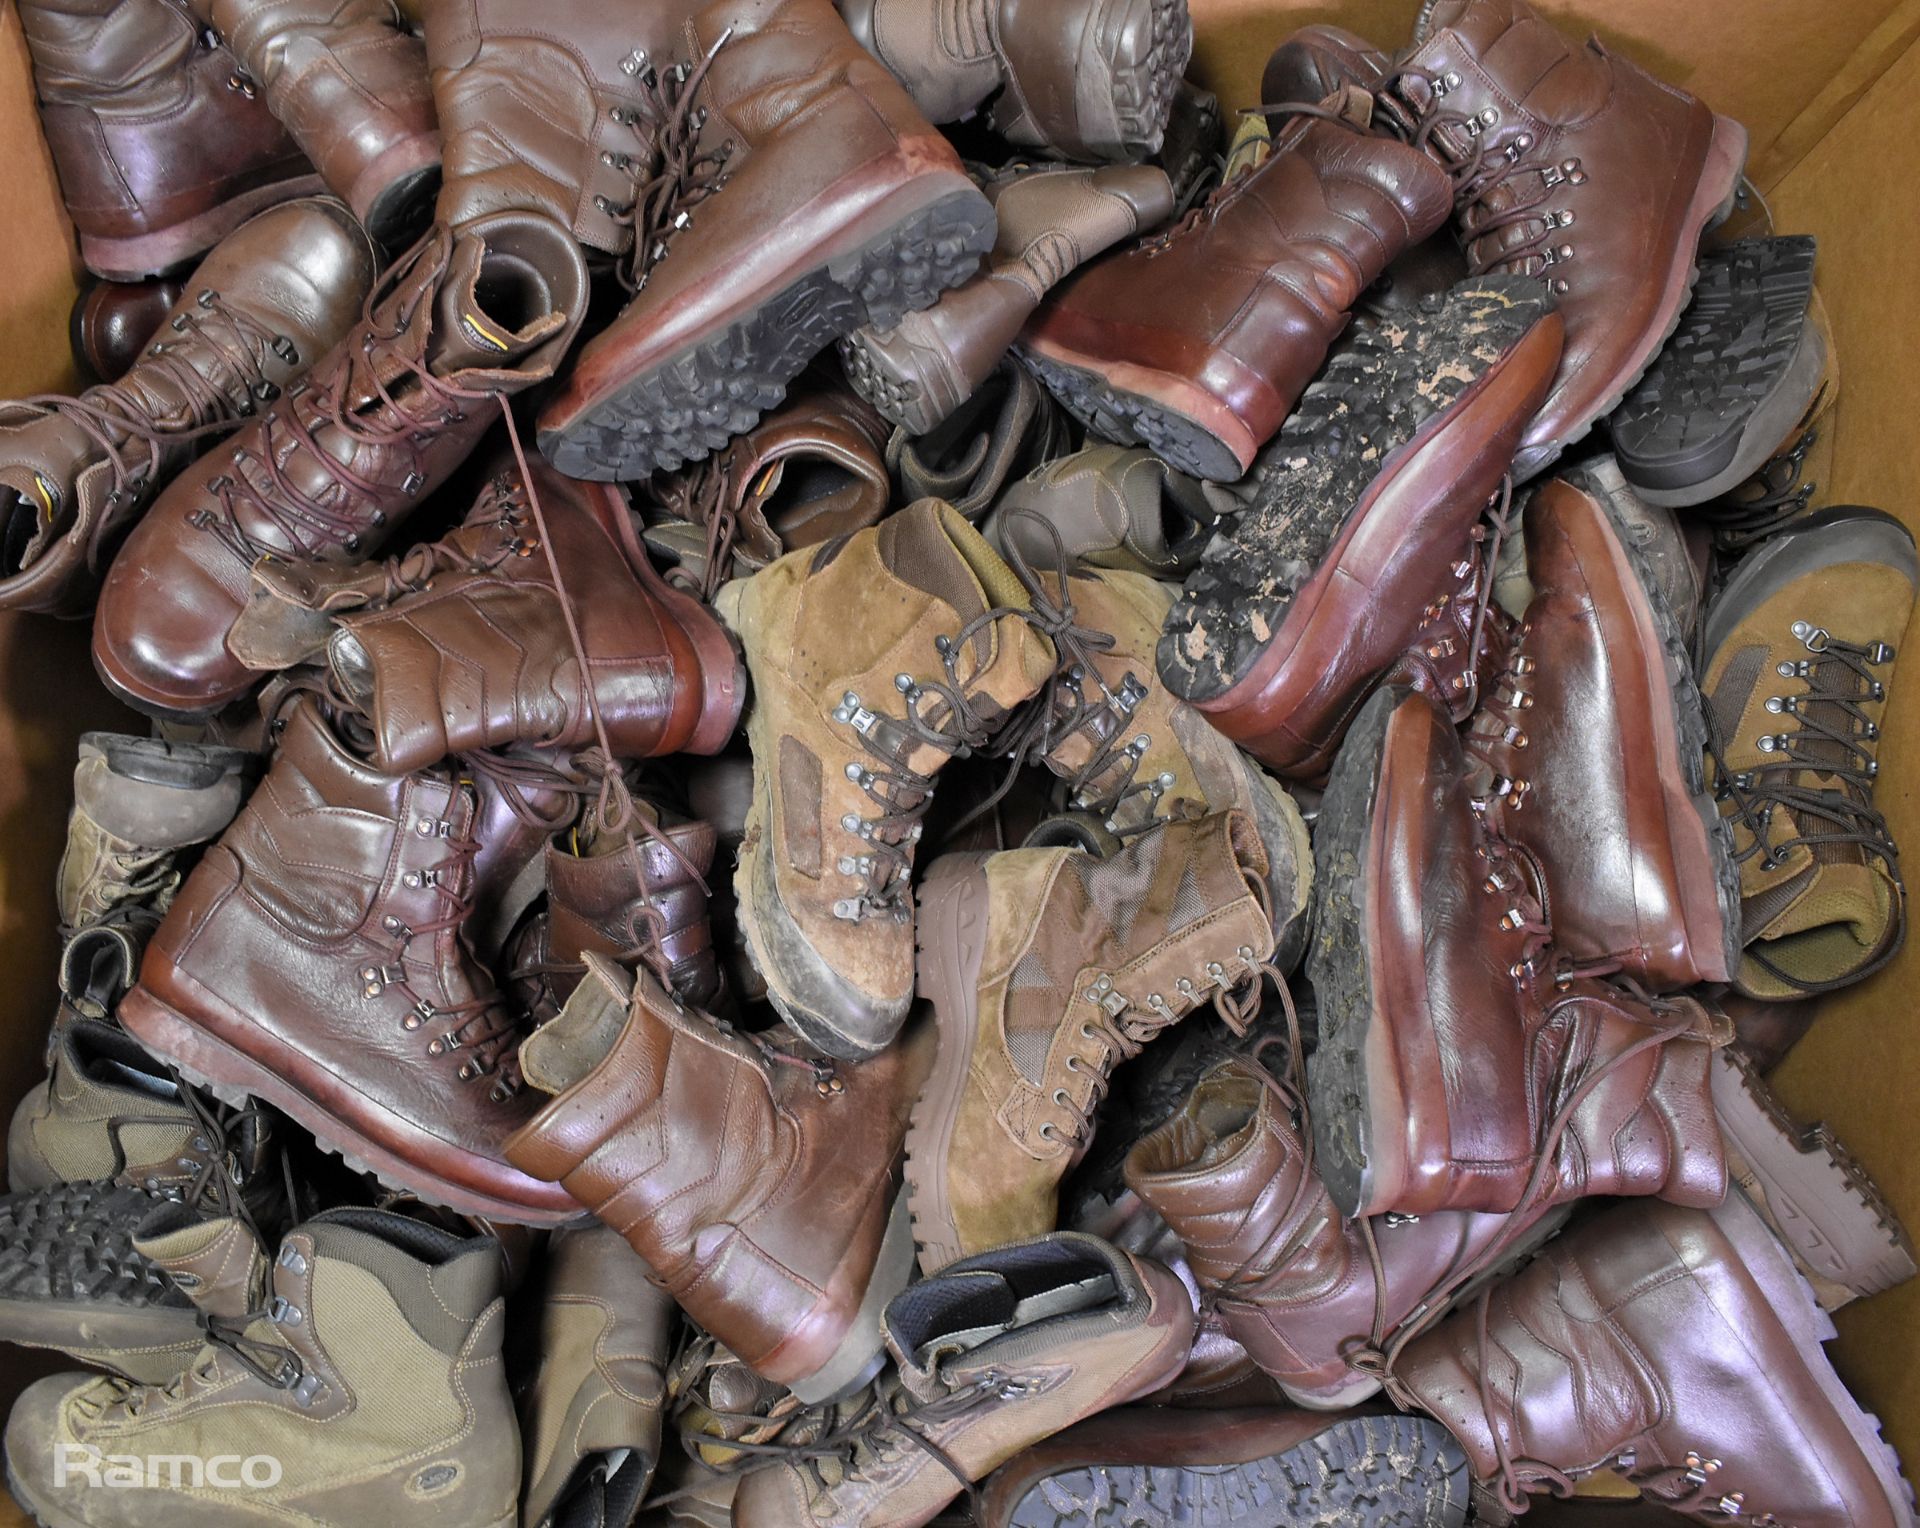 50x pairs of Various boots including Magnum, Iturri & YDS - mixed grades and sizes - Image 21 of 21